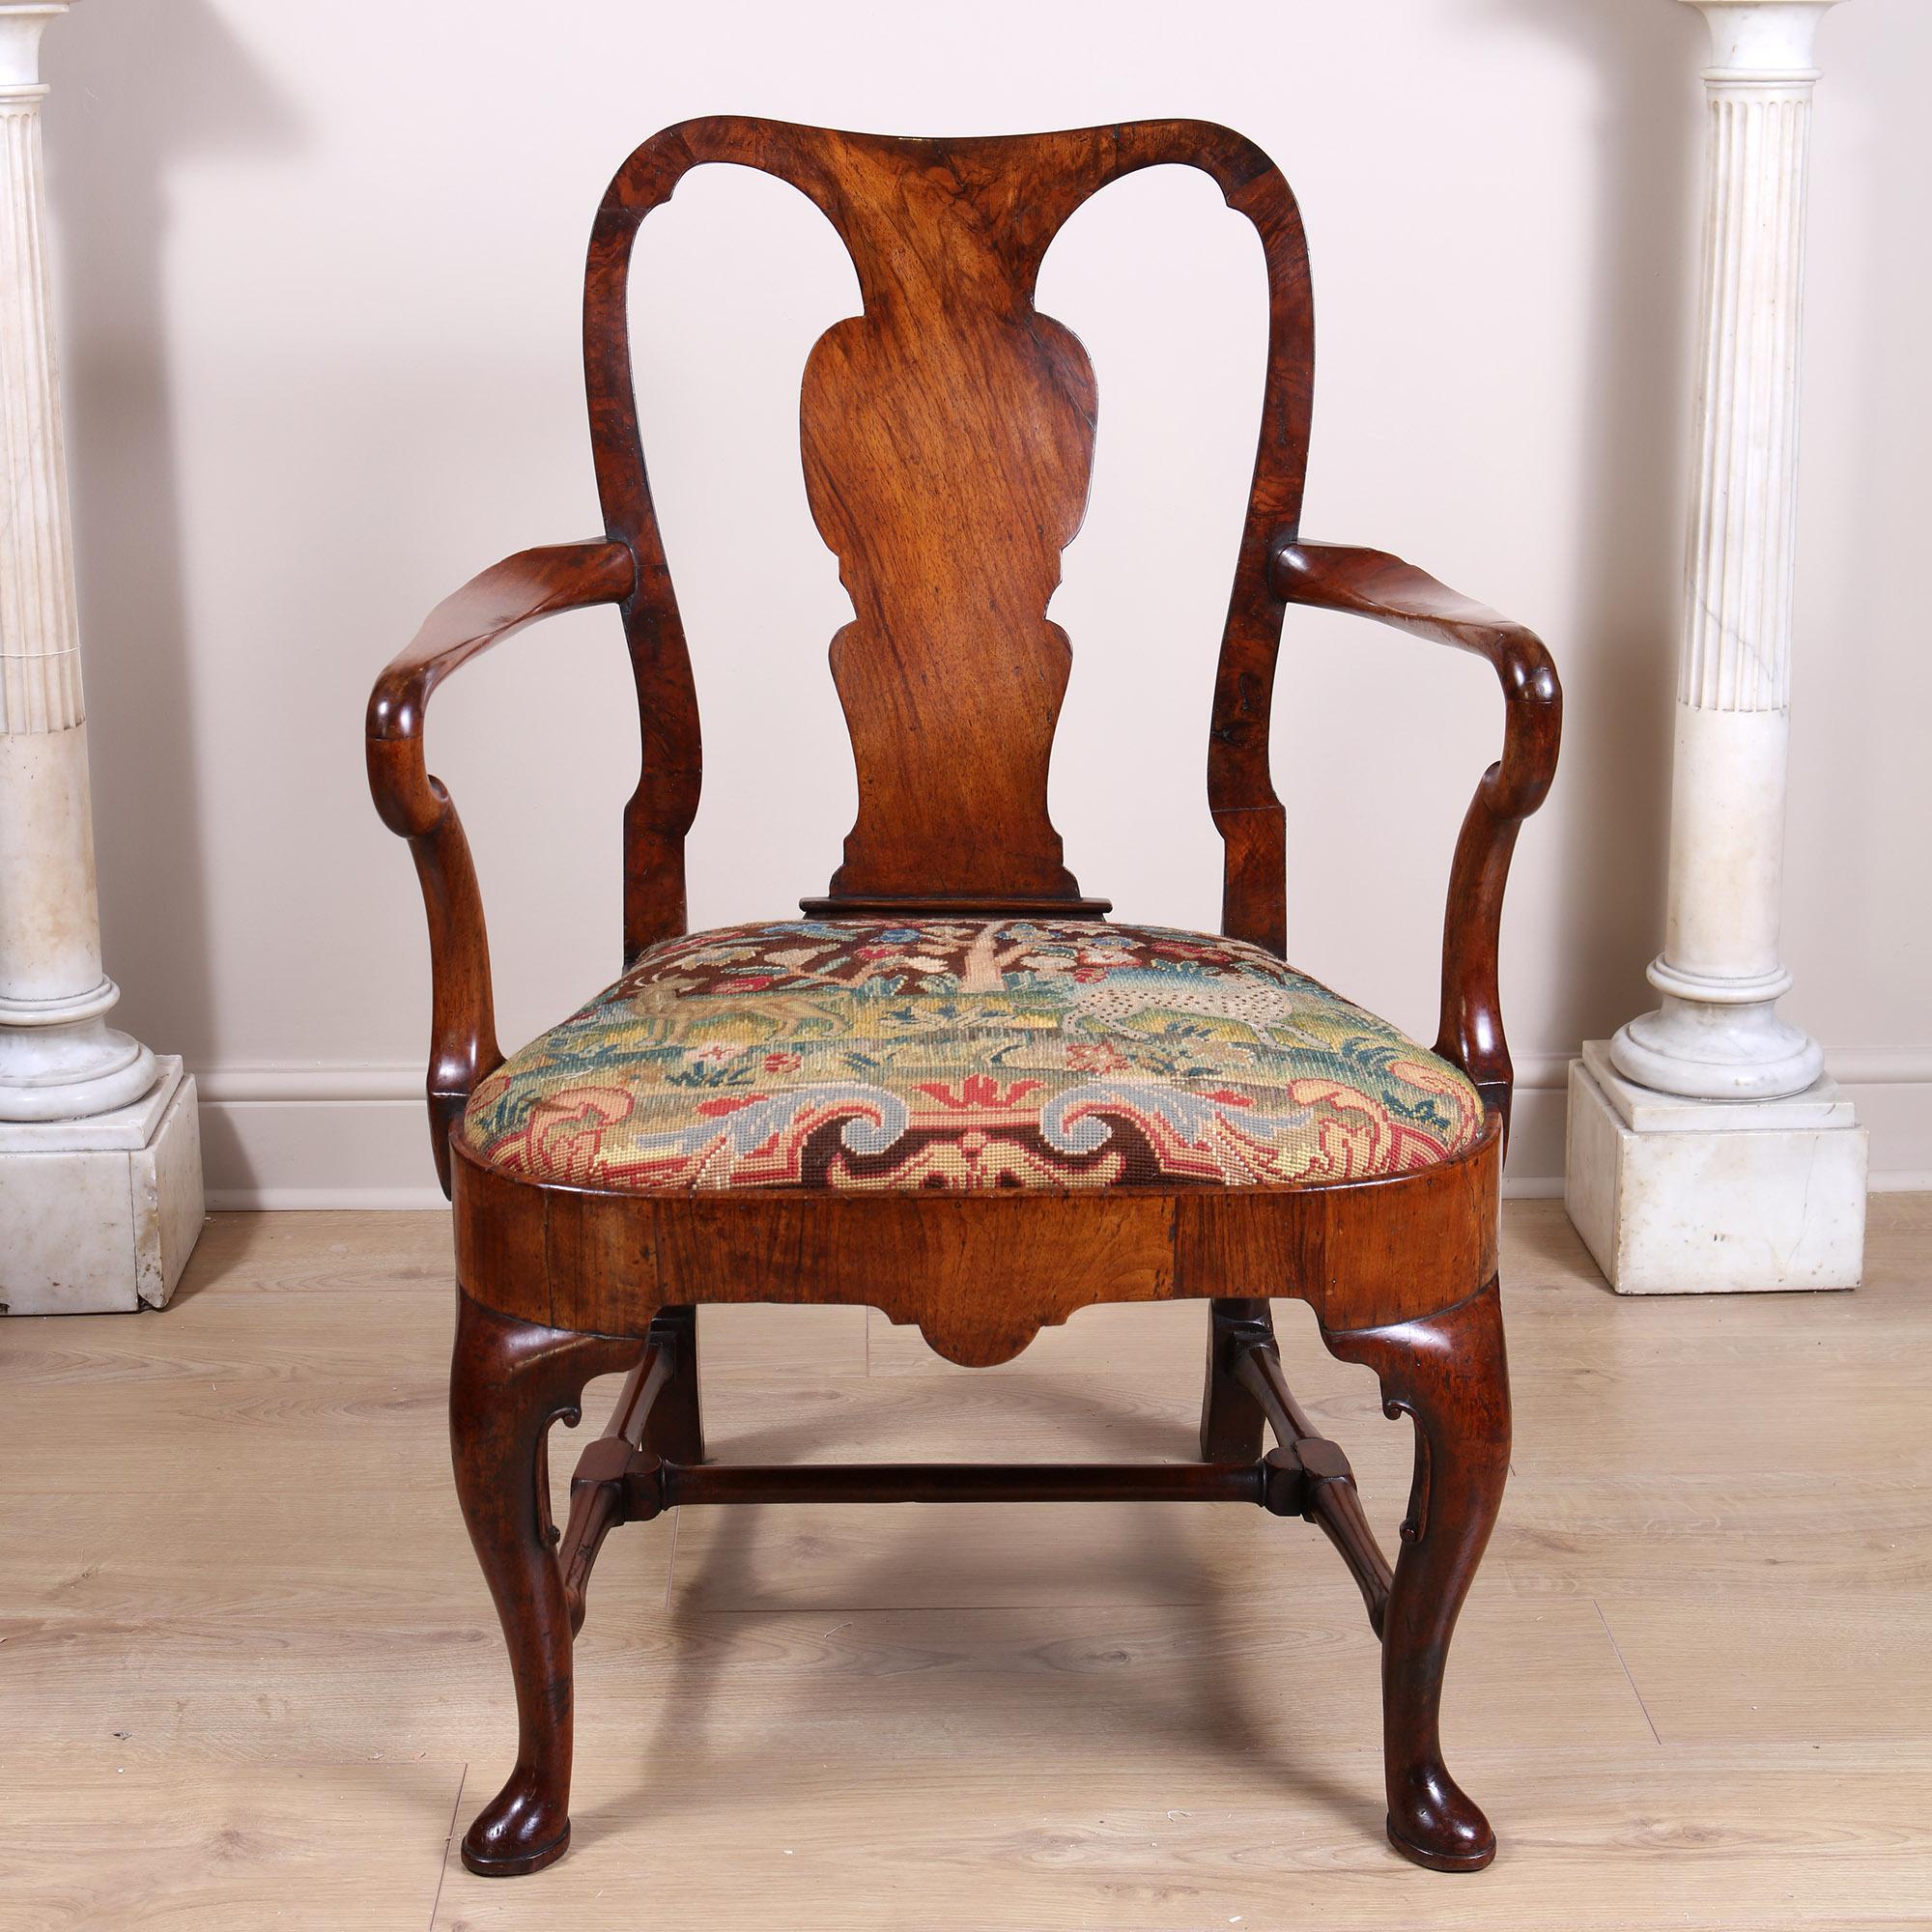 A fine early 18th-century walnut Shepherd’s Crook armchair with a vase-shaped splat and shepherd’s crook arm supports, on scroll eared cabriole front legs, with splayed block and columnar rear legs with a turned H stretcher. The seat is upholstered